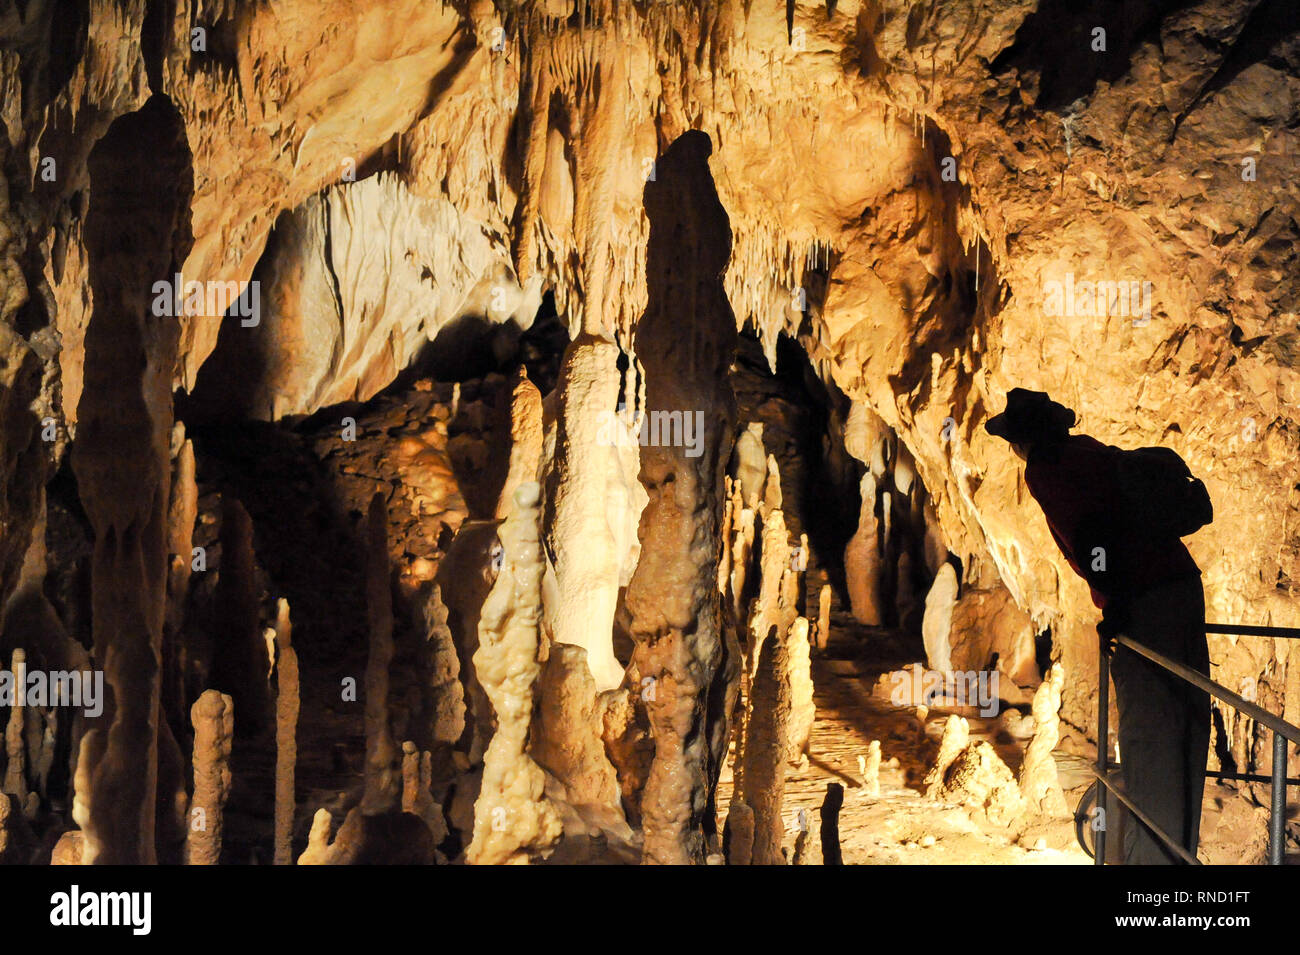 Pestera Ursilor (Bears' Cave) with 140 cave bear (Ursus spelaeus) skeletons  discovered on the site in Apuseni Mountains in Chiscau, Romania. July 16th  Stock Photo - Alamy